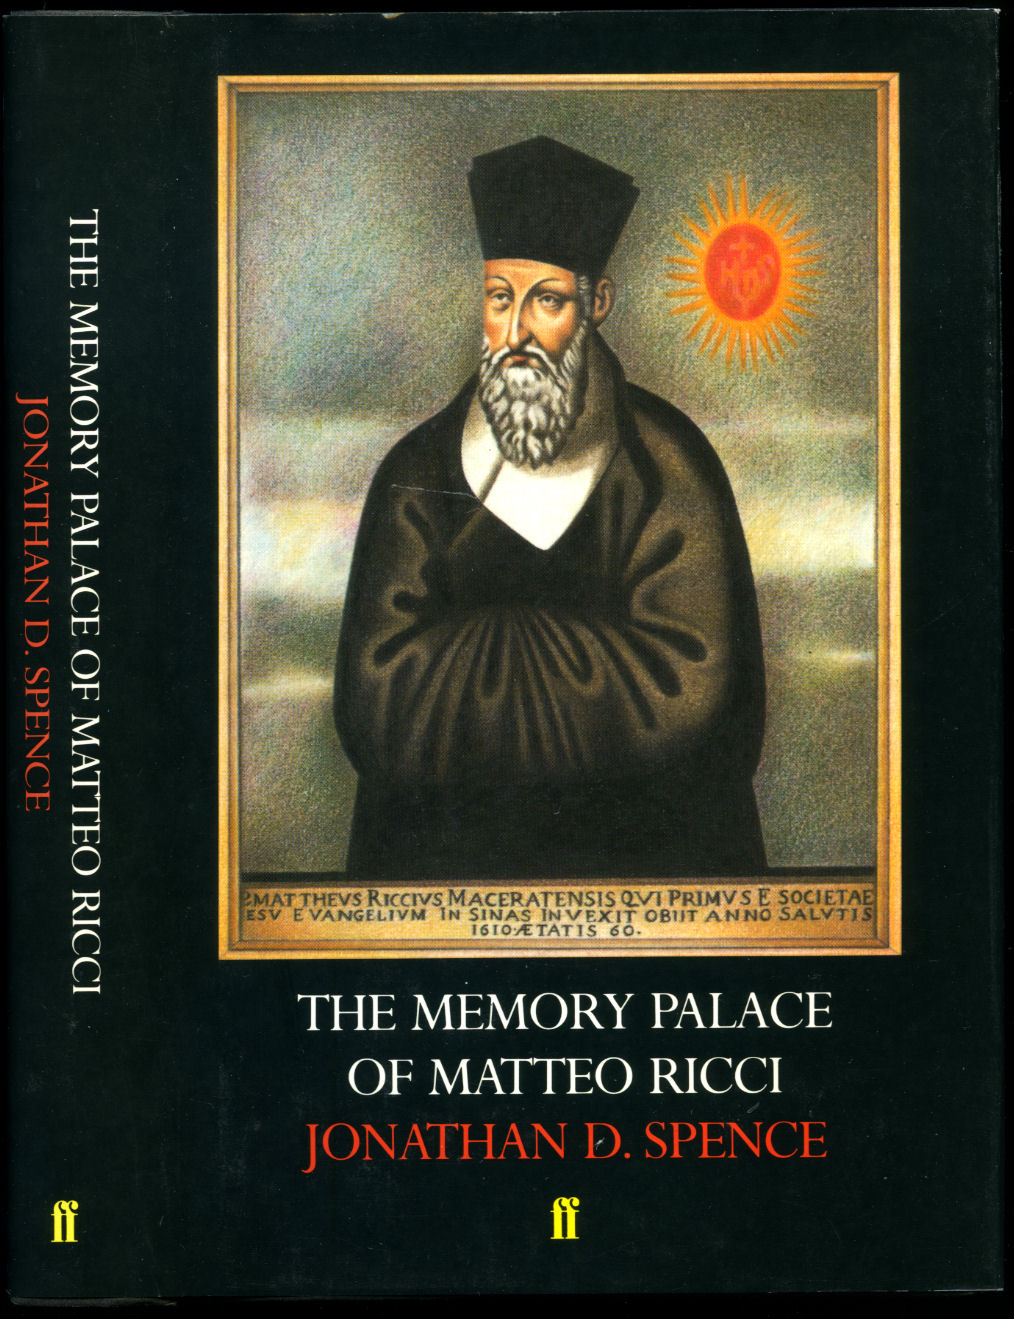 The Memory Palace of Matteo Ricci - Spence, Jonathan D. [Matteo Ricci Latin: Mattheus Riccius Maceratensis; 6 October 1552 - 11 May 1610), was an Italian Jesuit priest and one of the founding figures of the Jesuit China missions. He created the Kunyu Wanguo Quantu, a 1602 map of the world written in Chinese characters. He is considered a Servant of God by the Catholic Church].